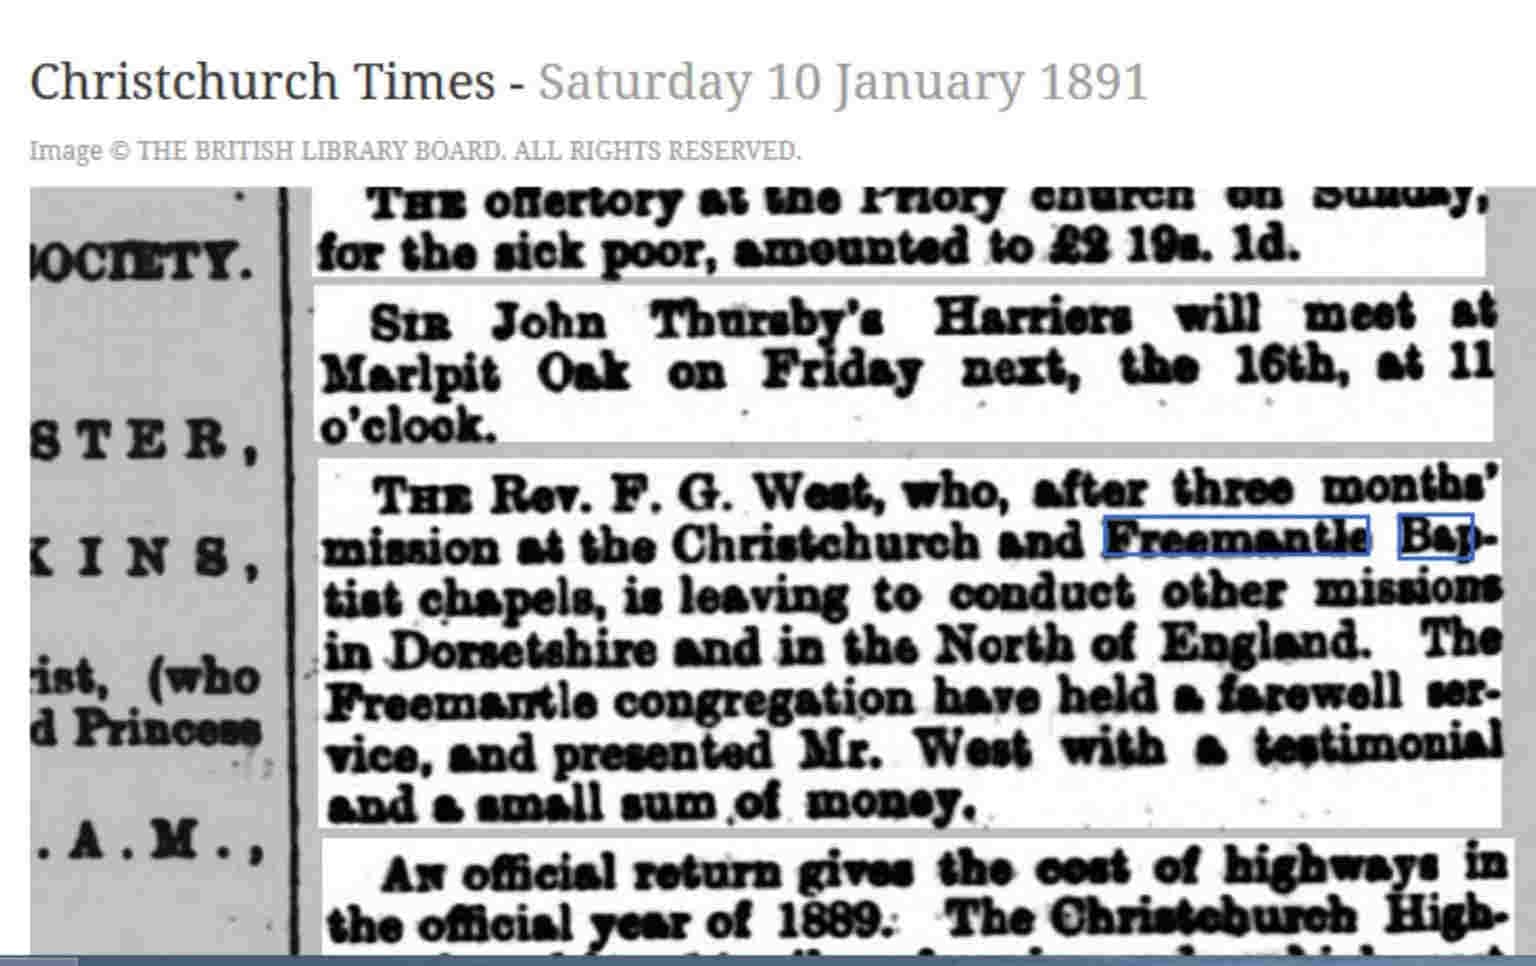 article about Freemantle Baptist Chapel minister leaving 1891